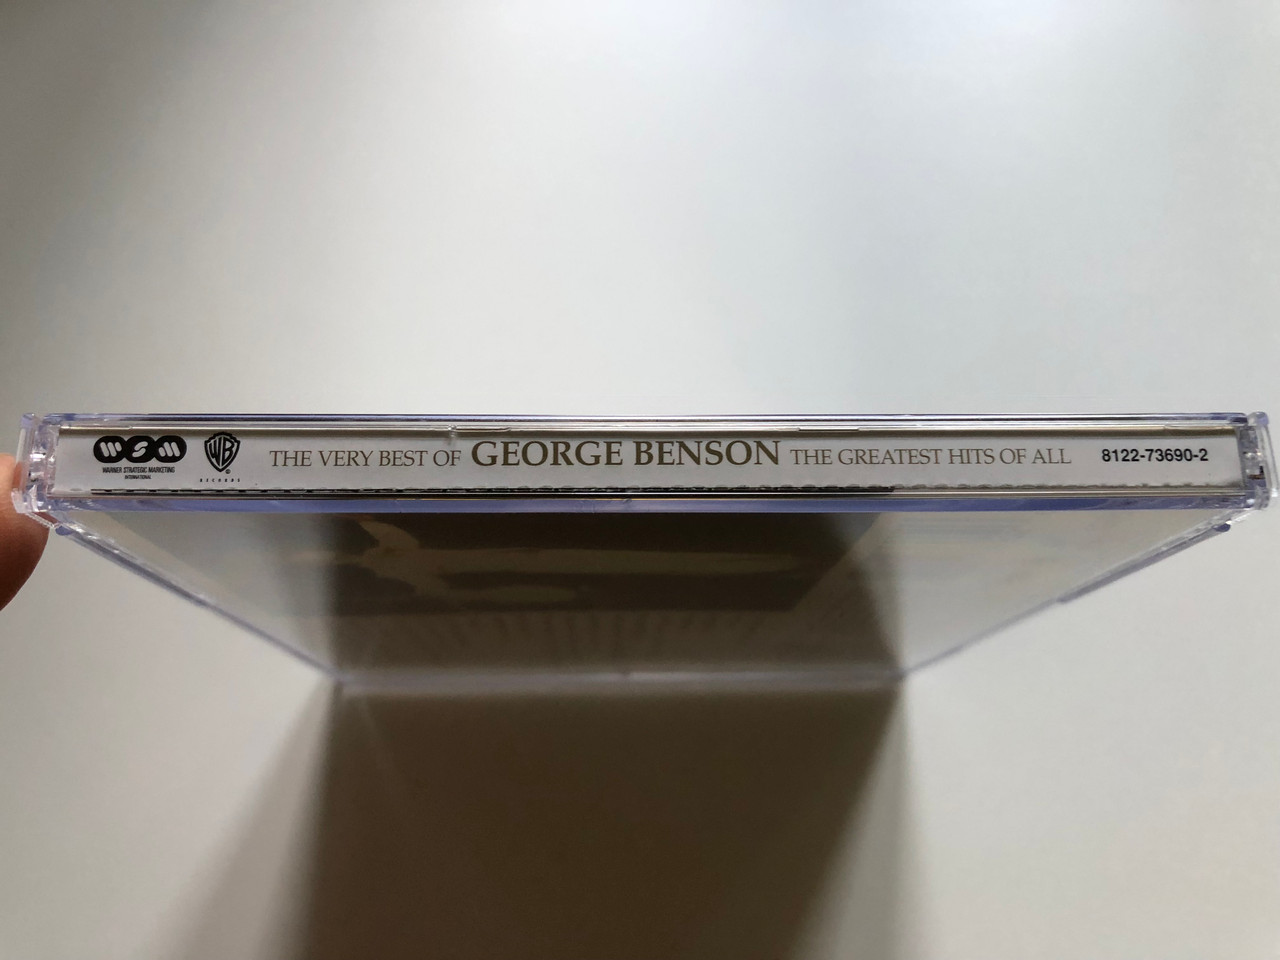 https://cdn10.bigcommerce.com/s-62bdpkt7pb/products/0/images/236086/The_Very_Best_Of..._George_Benson_-_The_Greatest_Hits_Of_All..._Featuring_Give_Me_The_Night_Turn_Your_Love_Around_Breezin_Never_Give_Up_On_A_Good_Thing_Love_X_Love_In_Your_Eyes_Warn_3__61096.1656417089.1280.1280.JPG?c=2&_gl=1*ntegbi*_ga*MjA2NTIxMjE2MC4xNTkwNTEyNTMy*_ga_WS2VZYPC6G*MTY1NjQwODYyMi40NTcuMS4xNjU2NDE2OTMyLjM5